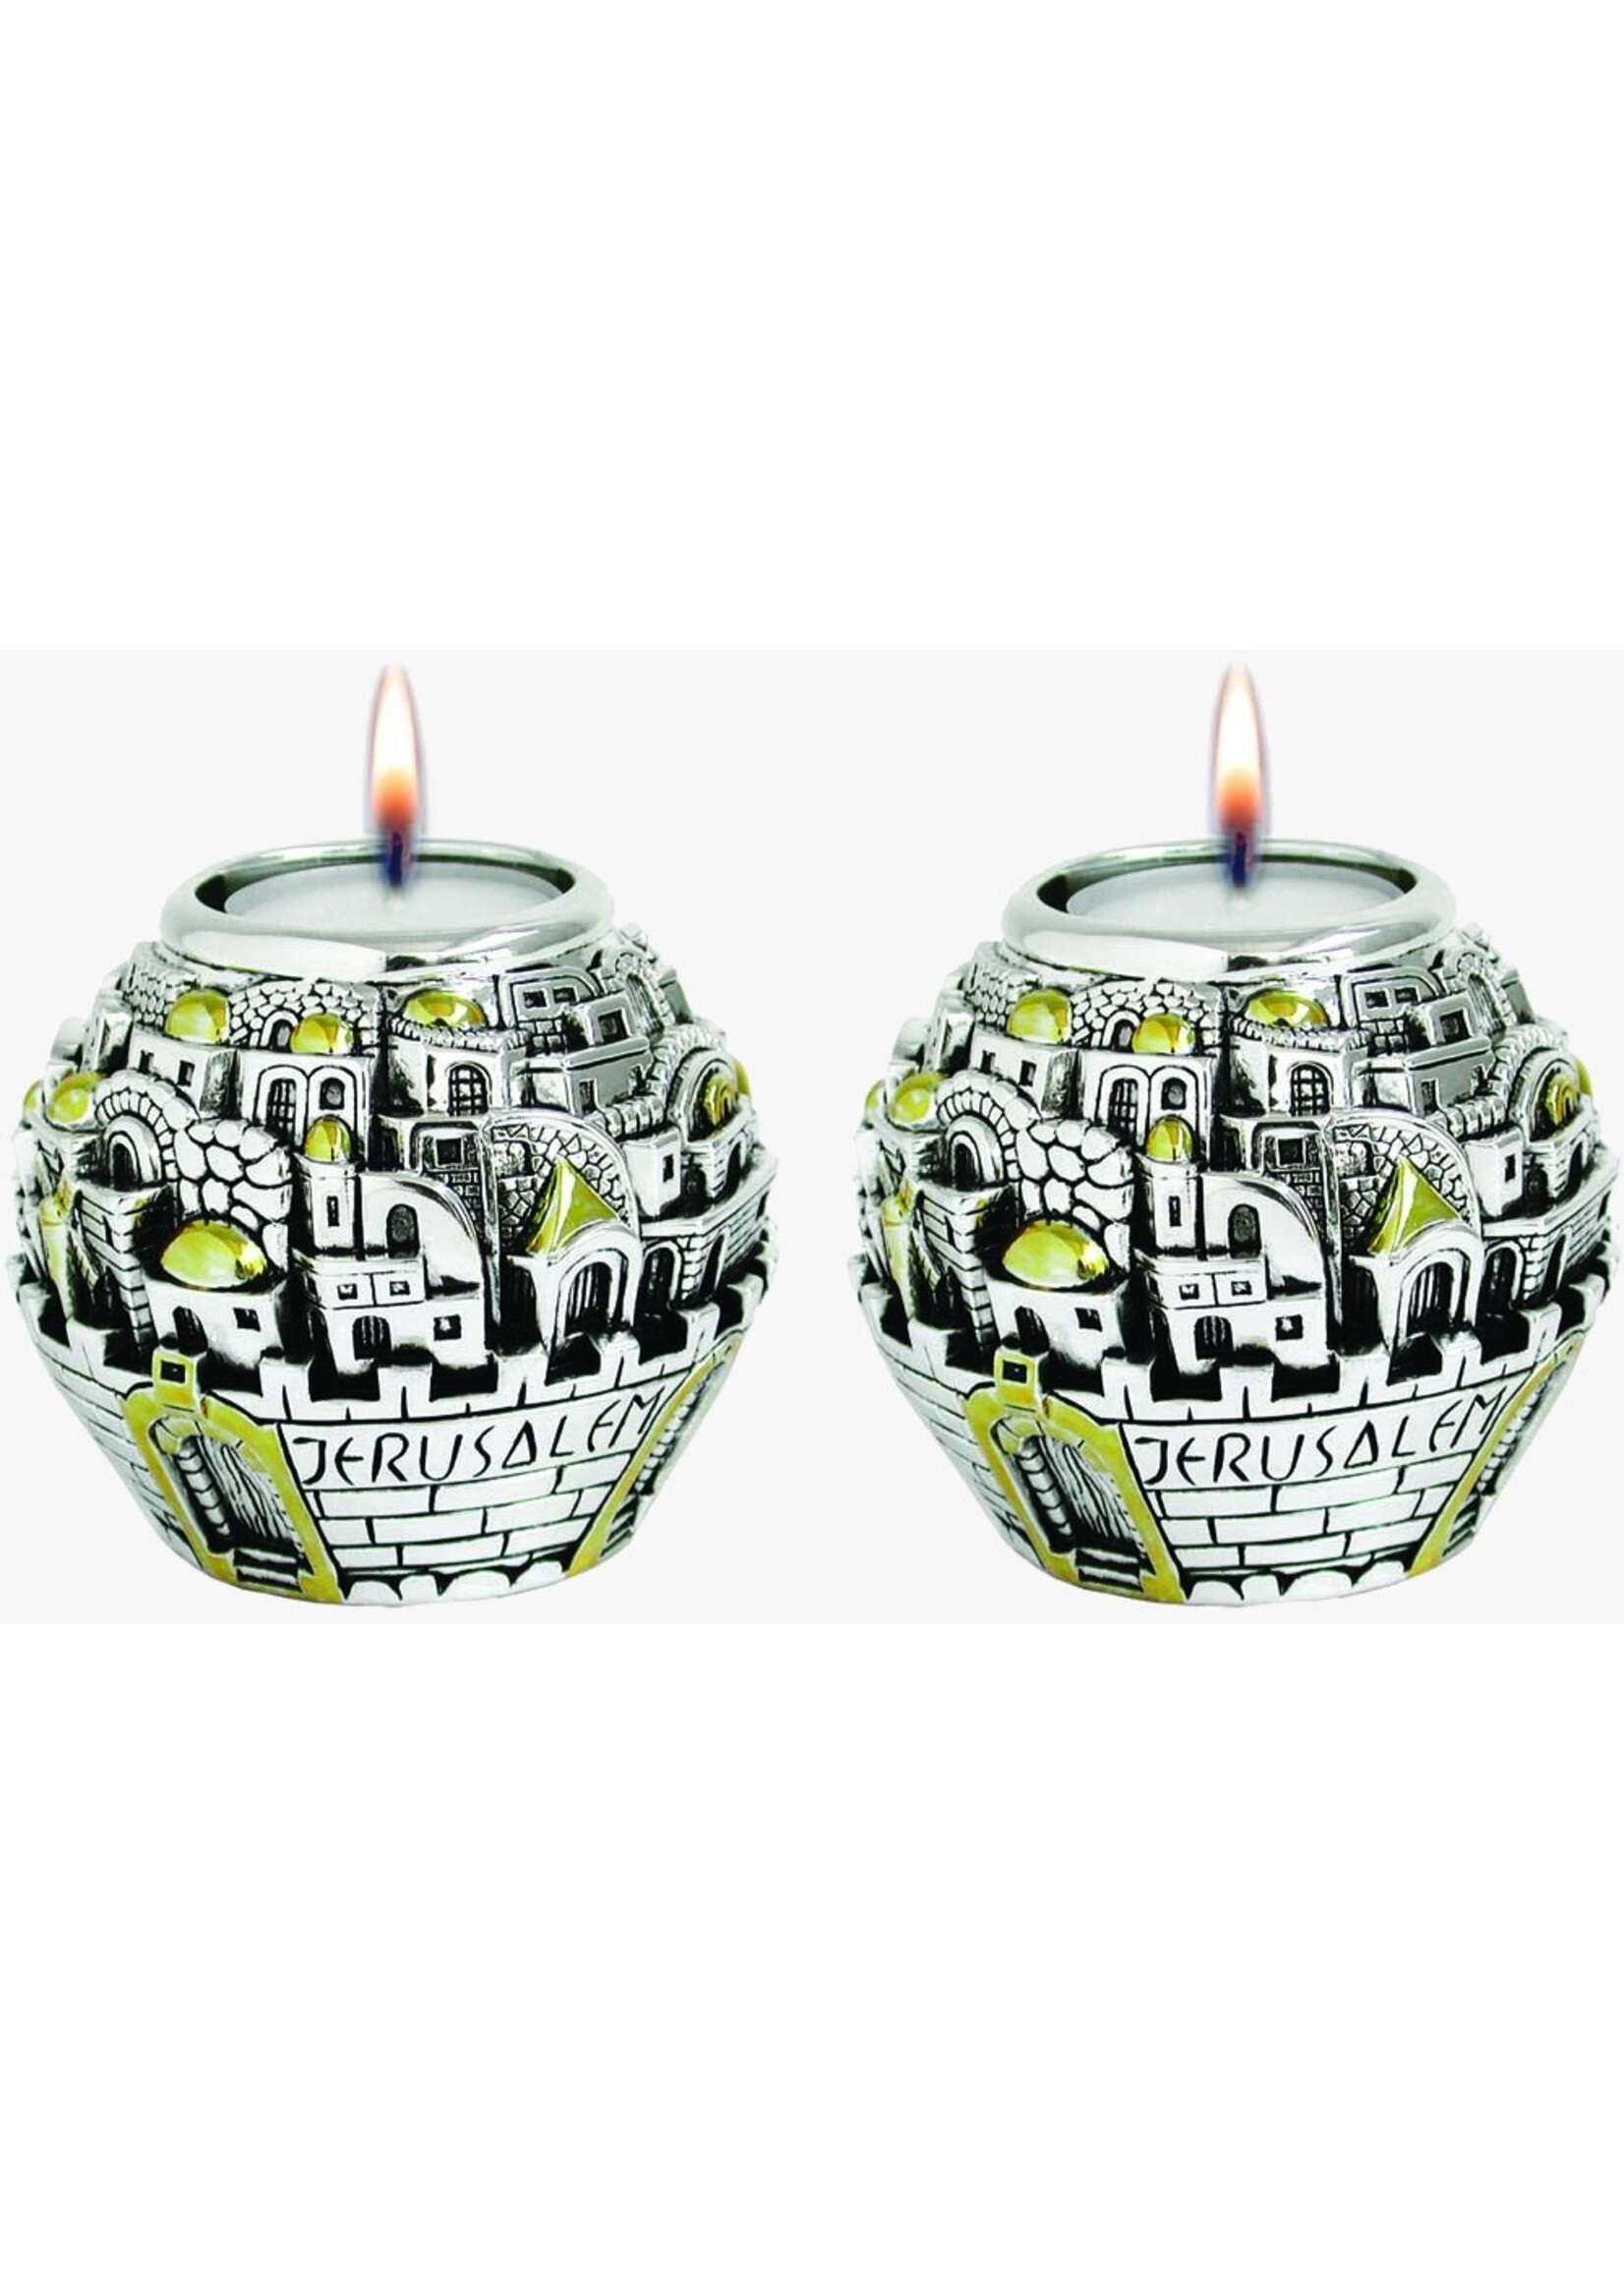 CANDLE HOLDERS JERUSALEM SPHERE SILVER PLATED